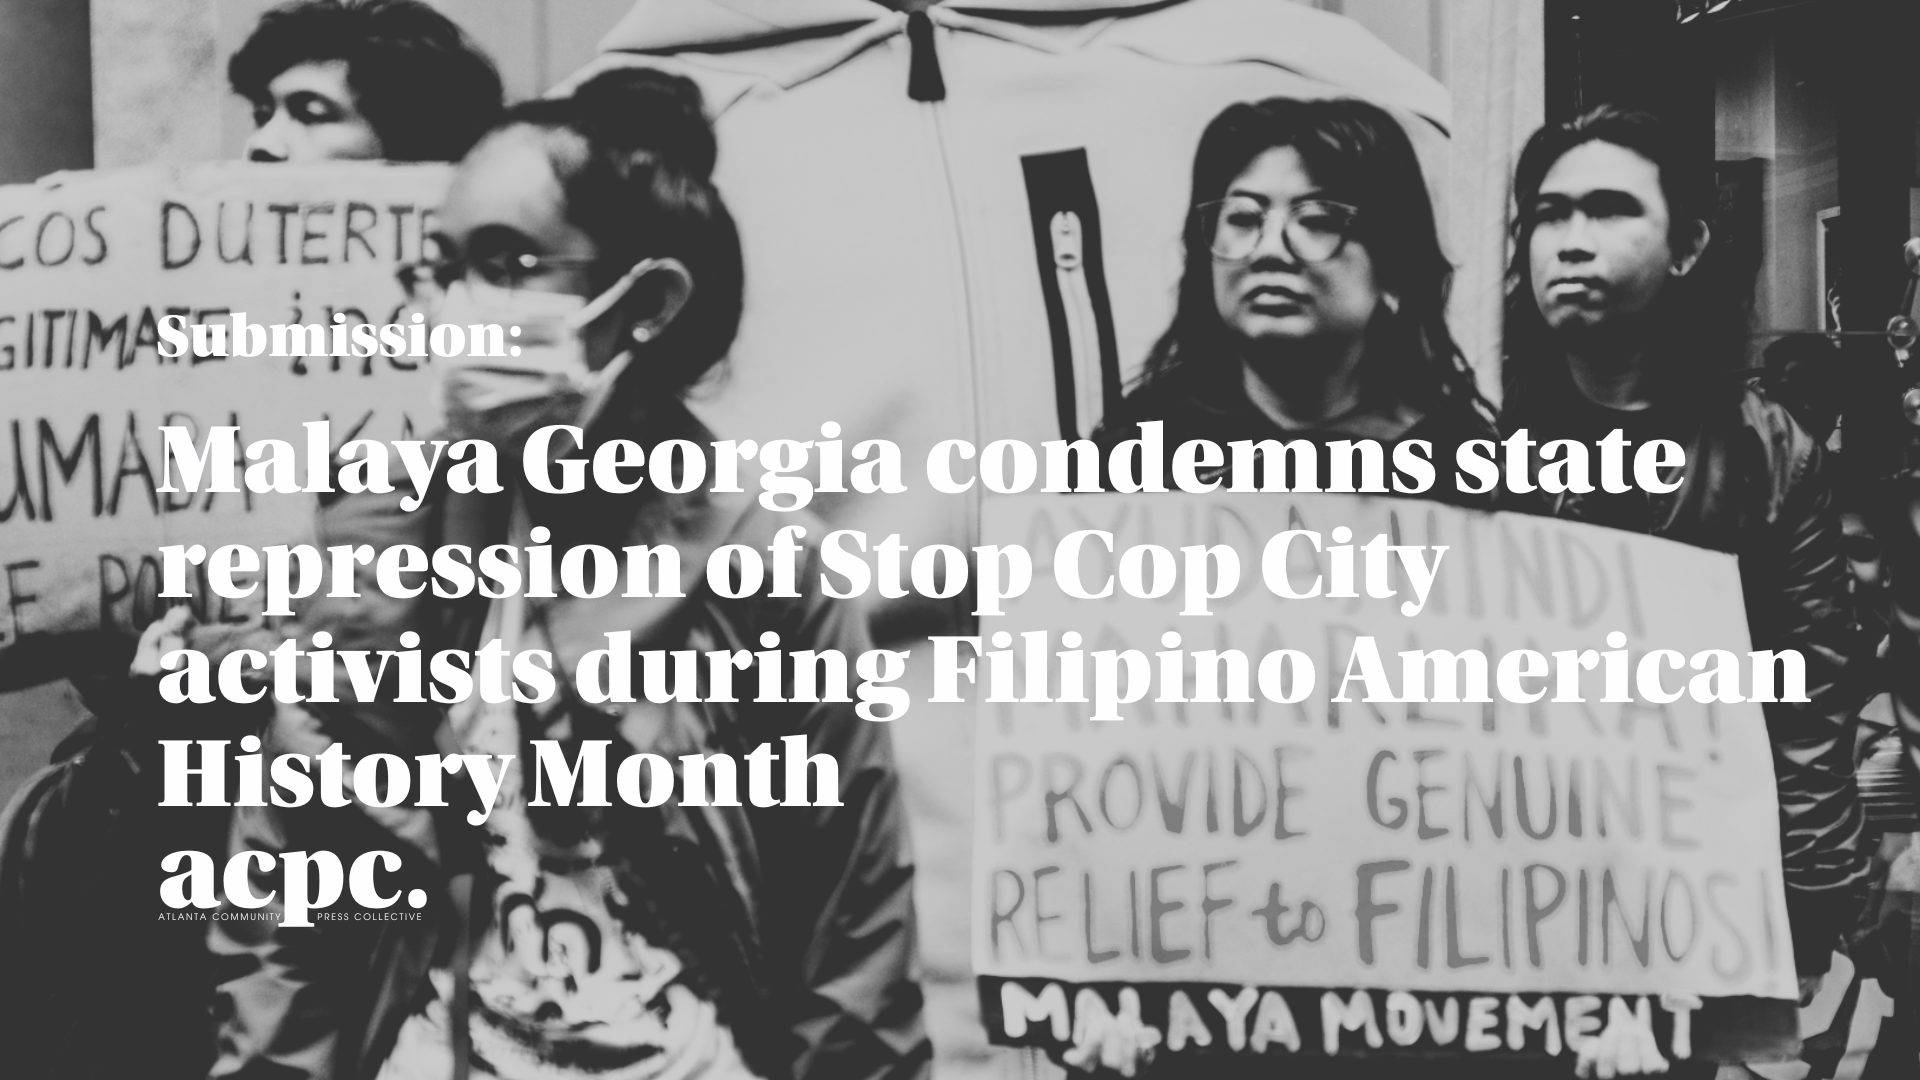 Malaya Georgia condemns state repression of Stop Cop City activists during Filipino American History Month